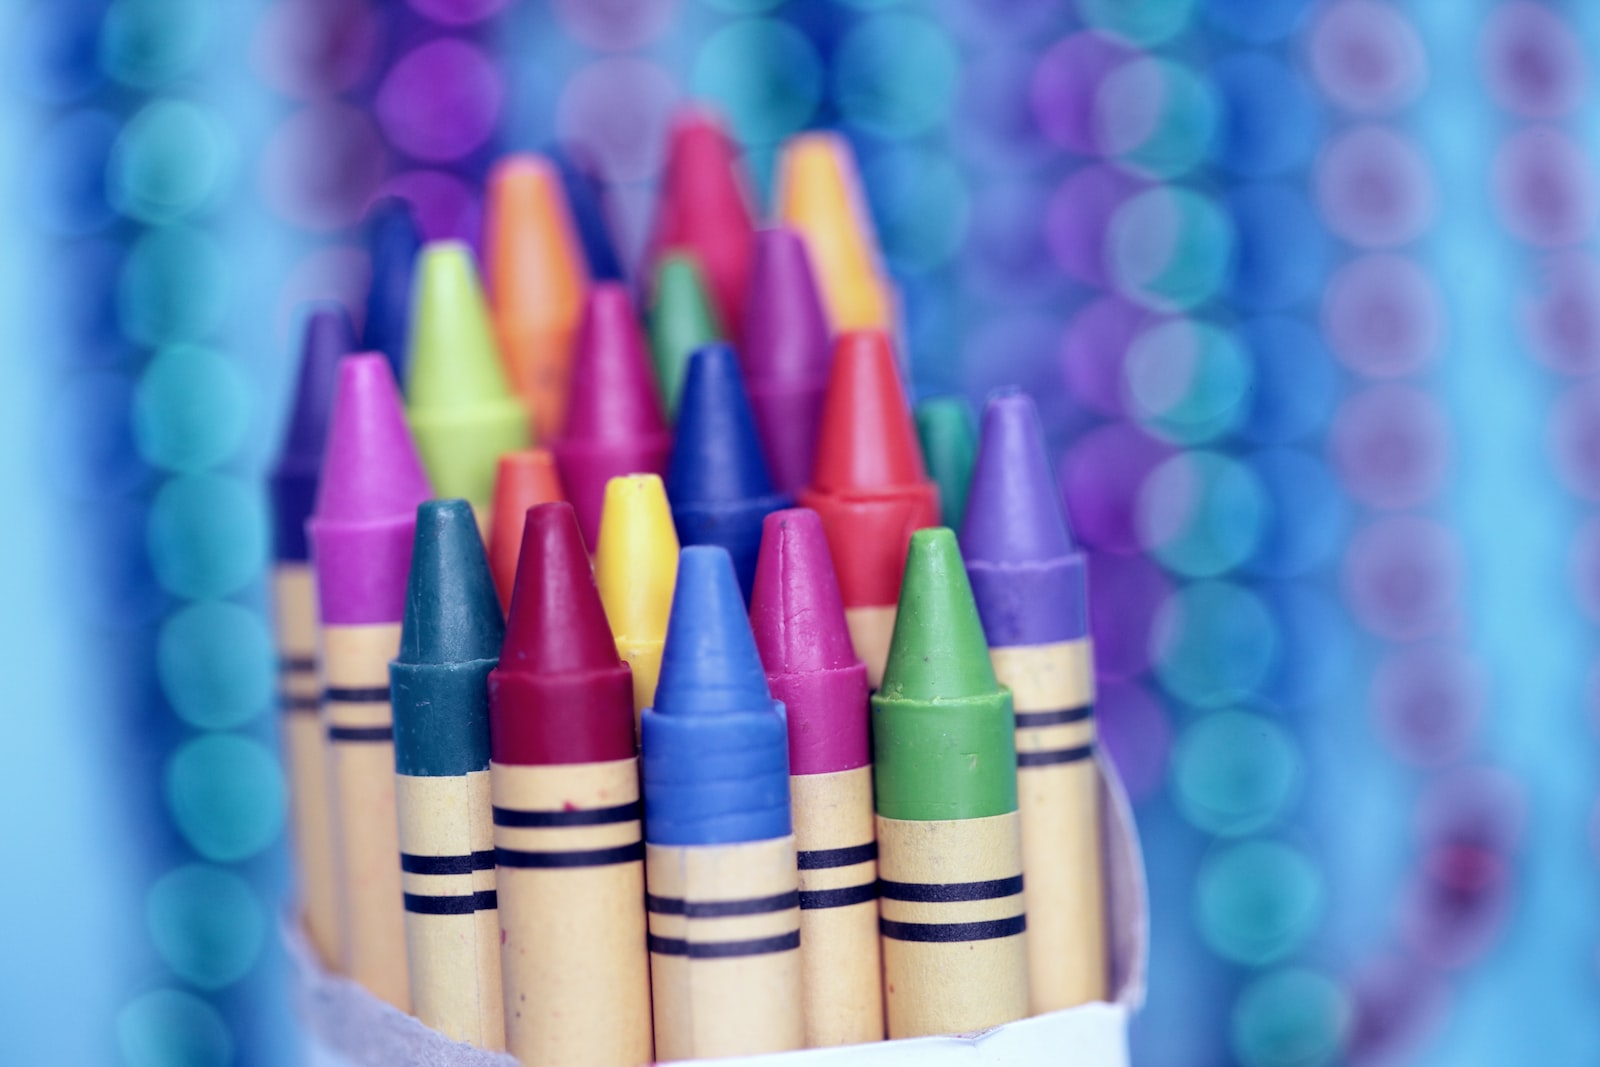 A variety of crayons in different colors